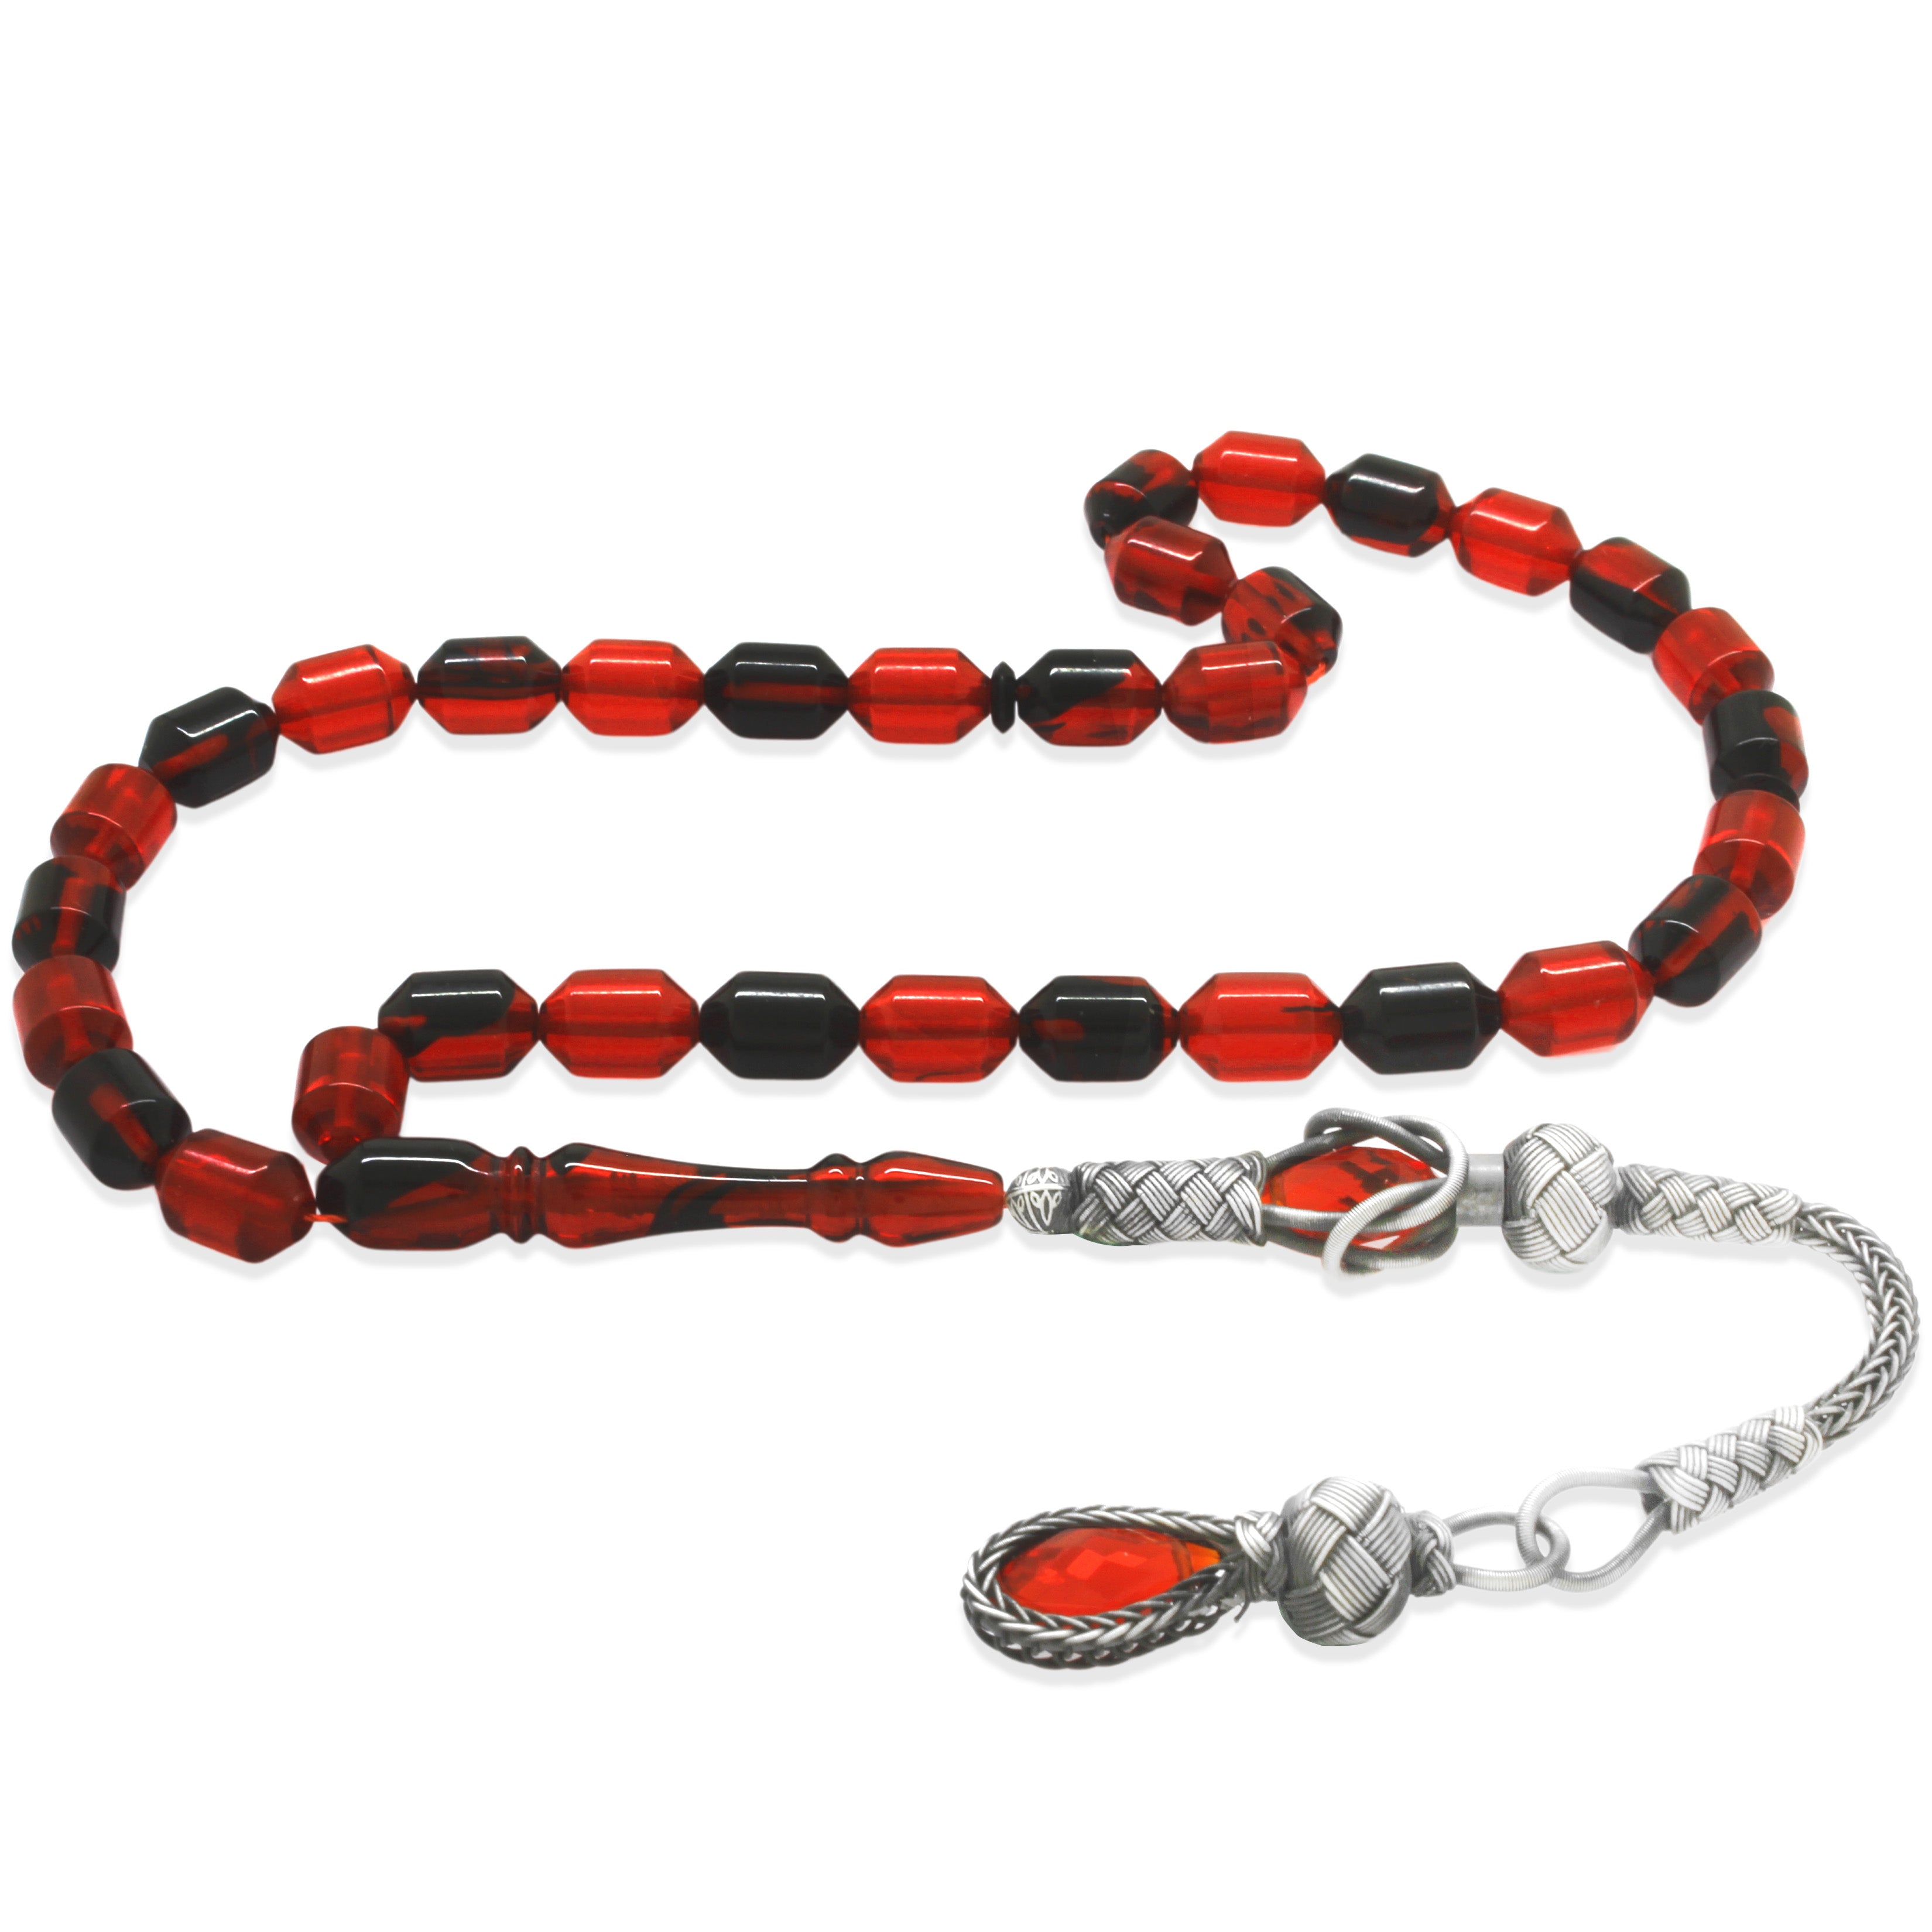 1000 Sterling Silver Kazaz Tasseled End Capsule Cut Red-Black Fire Amber Rosary